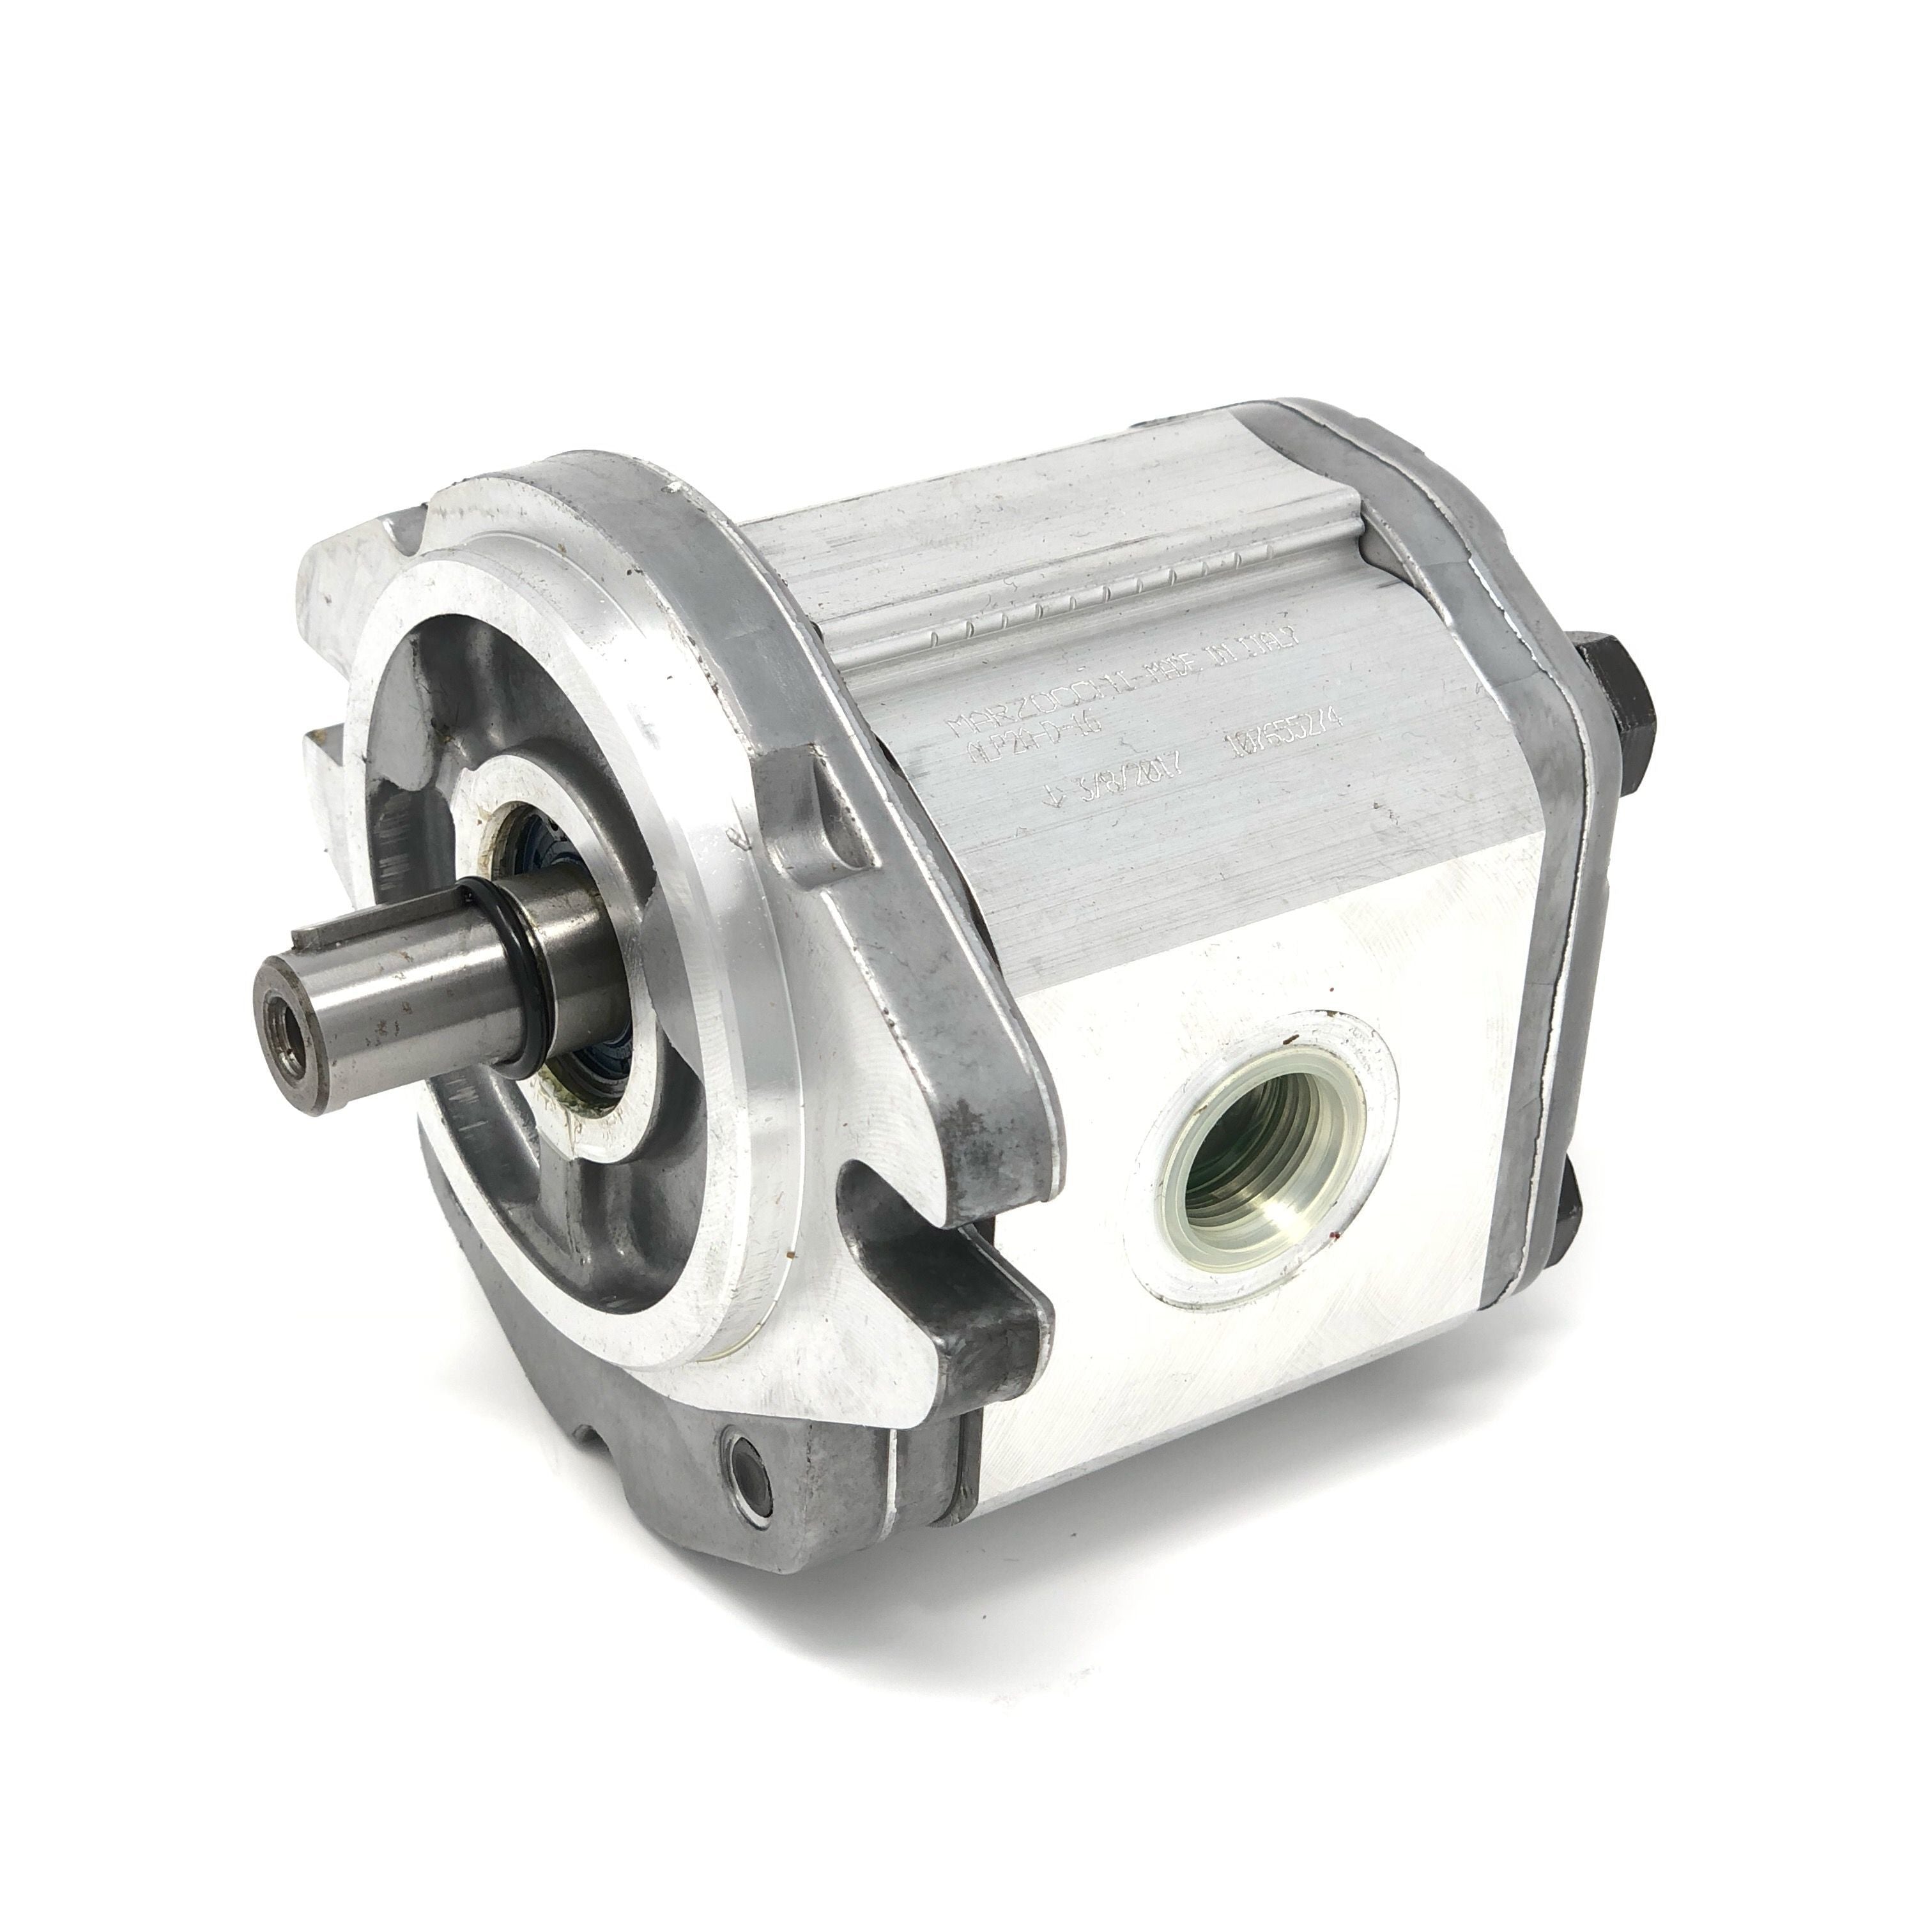 ALP1A-D-20 : Marzocchi Gear Pump, CW, 13.8cc (0.8418in3), 6.56 GPM, 2175psi, 2000 RPM, #10 SAE (5/8") In, #8 SAE (1/2") Out, Keyed Shaft 1/2" Bore x 1/8" Key, SAE AA 2-Bolt Mount